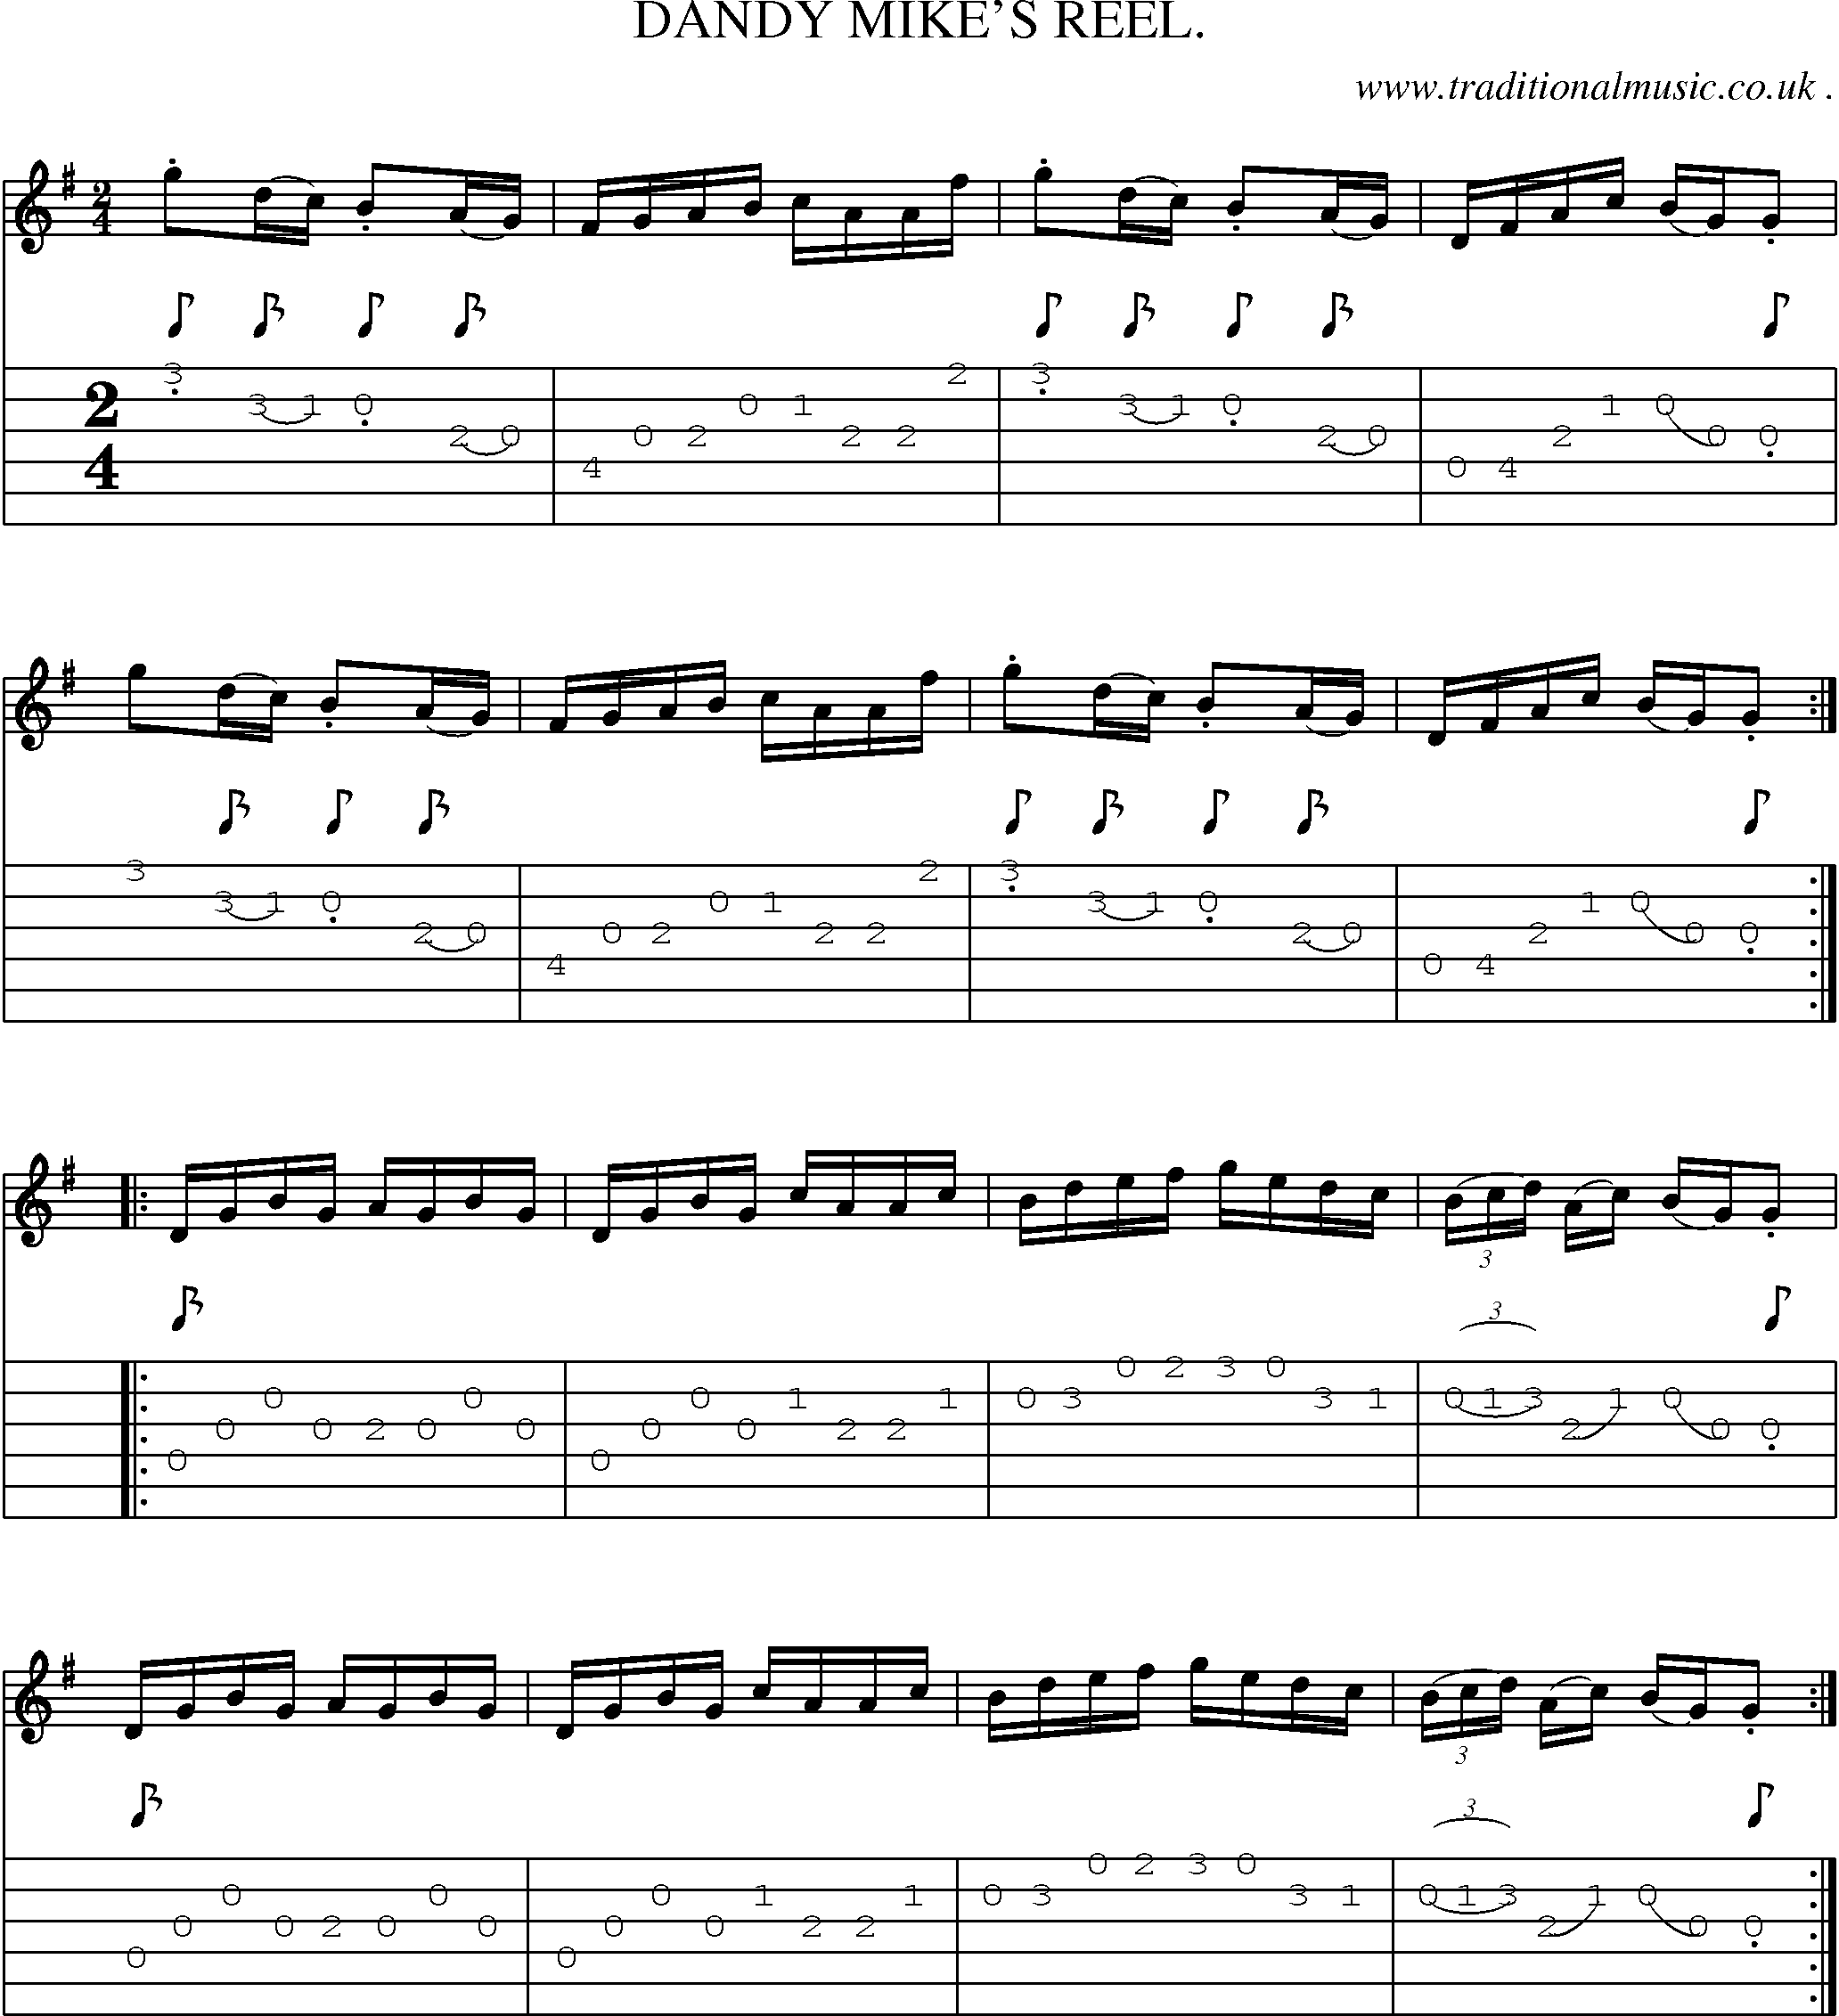 Sheet-Music and Guitar Tabs for Dandy Mikes Reel